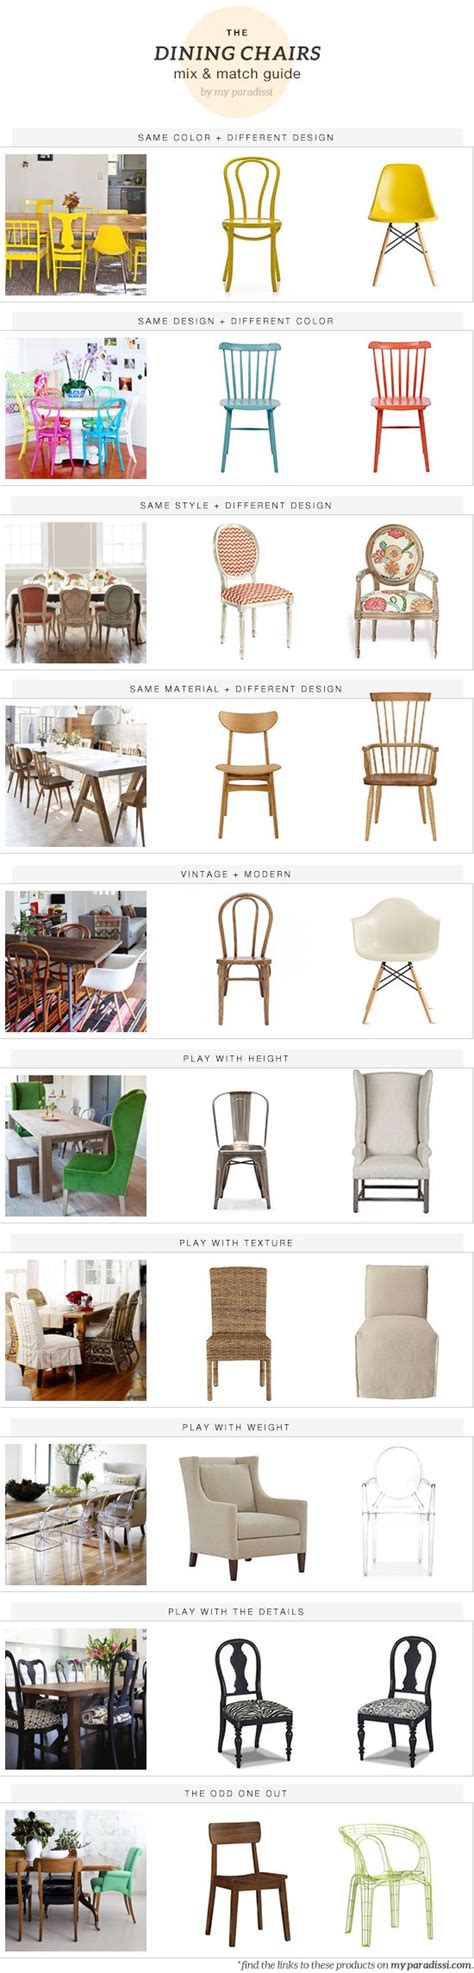 The Dining Chairs Mix And Match Guide Sillas Diseño Ideas De Diseño